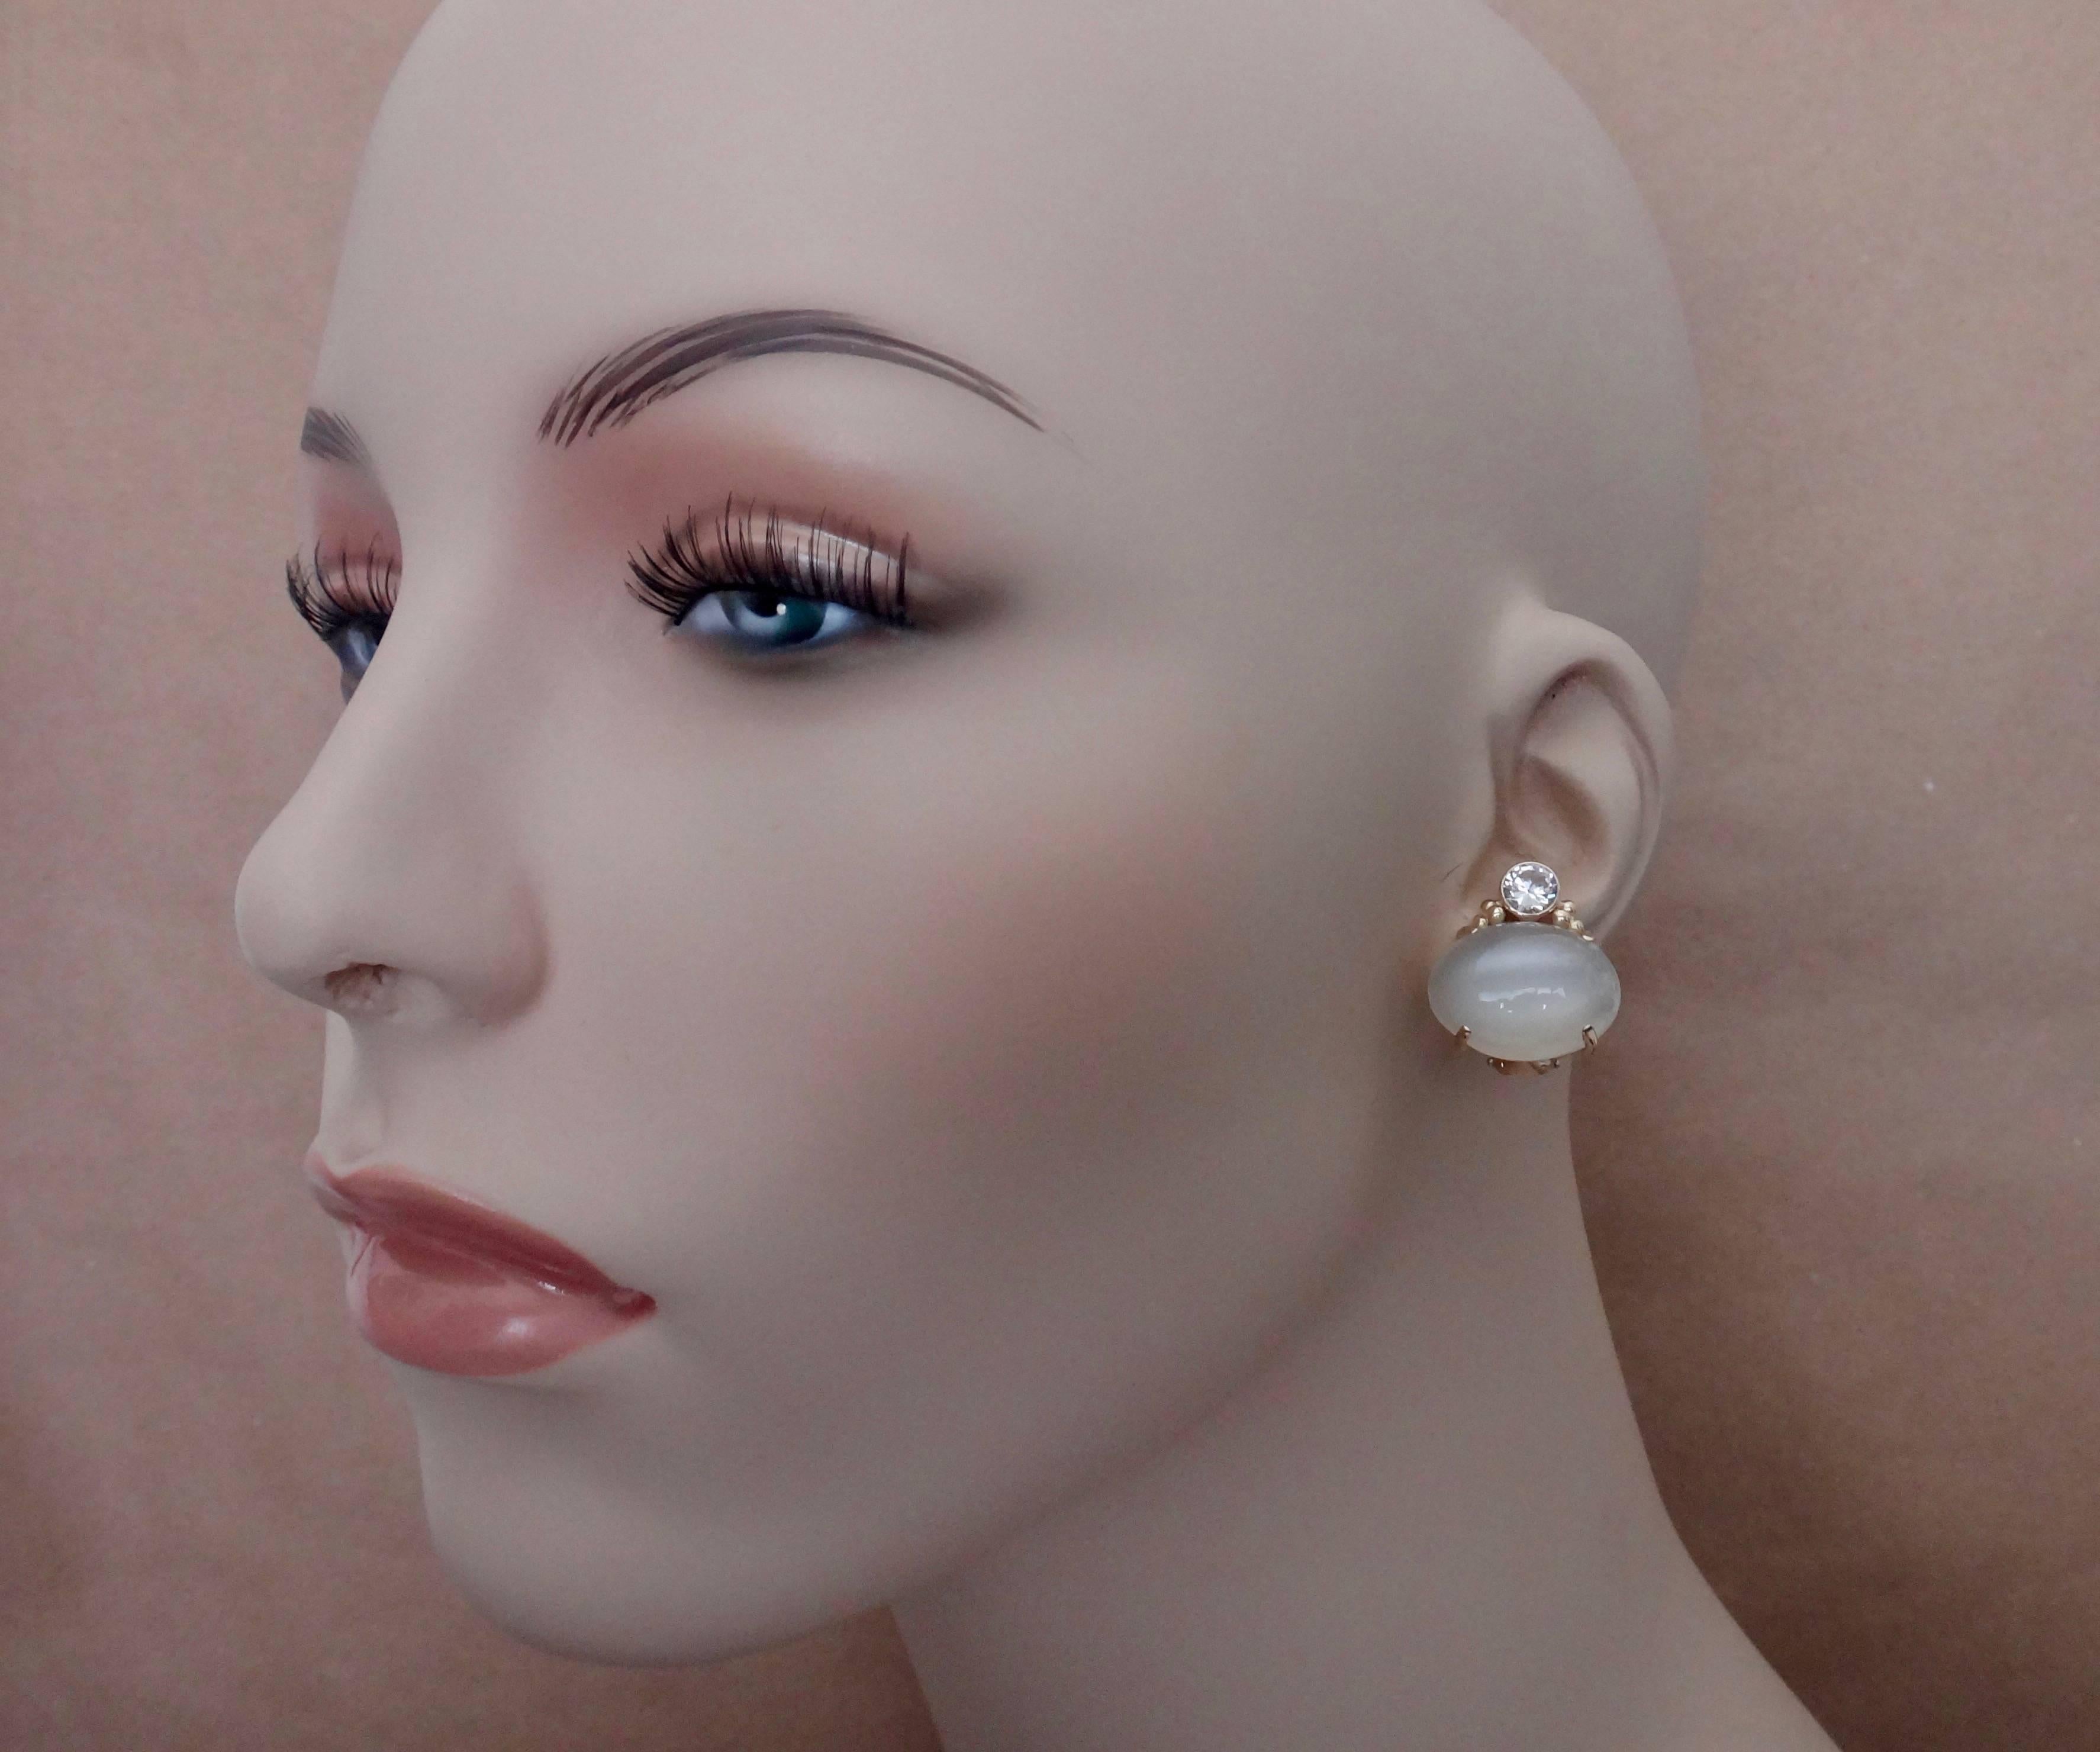 A perfectly matched pair of luminous, white moonstones are paired with brilliant cut silver sapphires in these classic, summery button earrings.  The moonstones are prong set while the sapphires are bezel set and detailed with small gold beads.  The